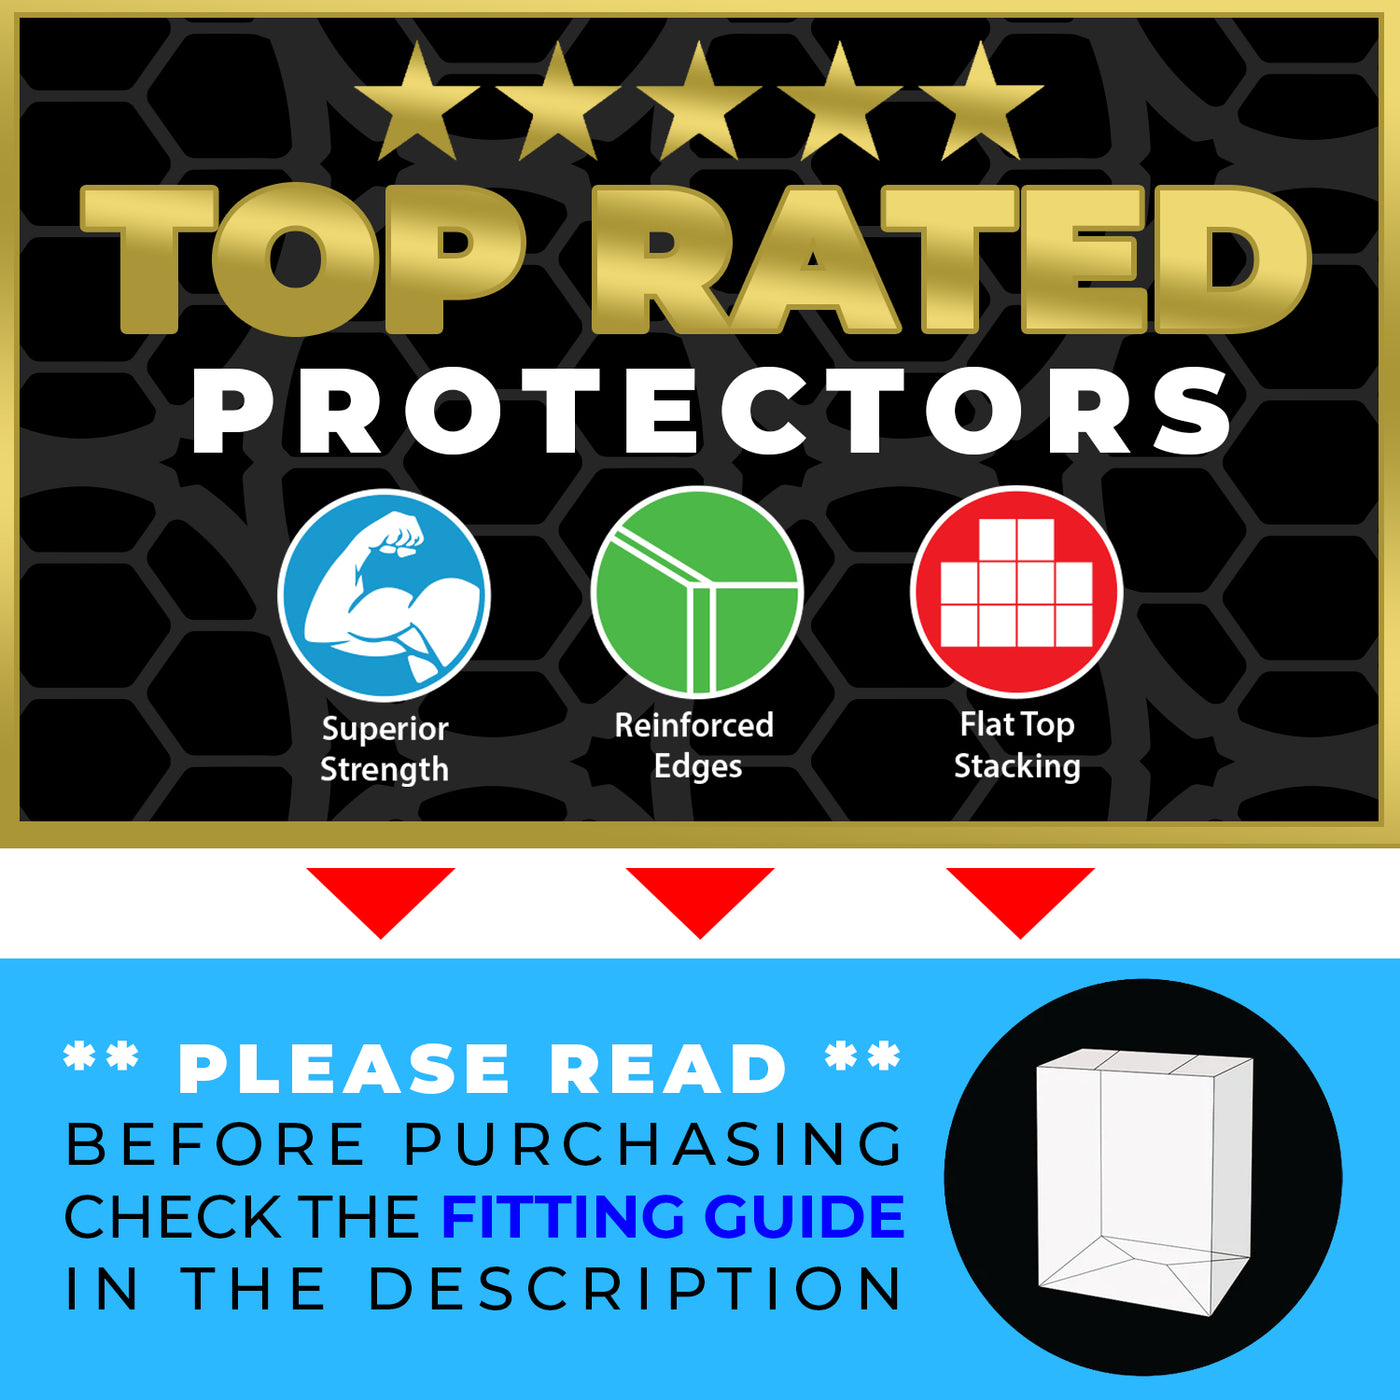 6 pack best funko pop protectors thick strong uv scratch flat top stack vinyl display geek plastic shield vaulted eco armor fits collect protect display case kollector protector